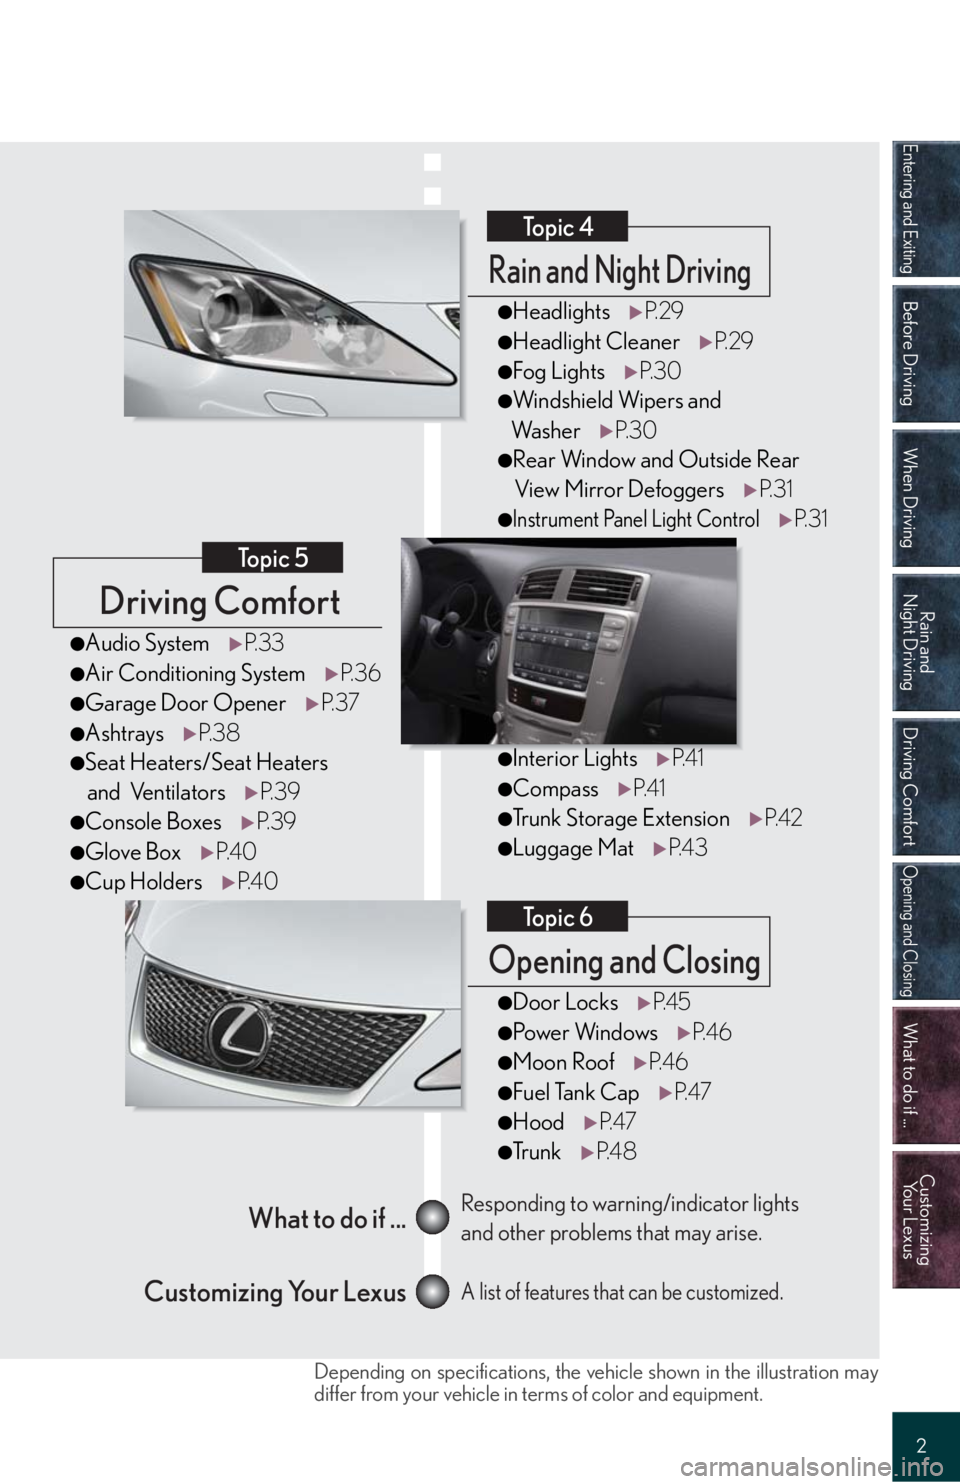 Lexus IS F 2008  Audio/video System / LEXUS 2008 IS F QUICK GUIDE OWNERS MANUAL (OM53613U) Entering and Exiting
Before Driving
When Driving
Rain and 
Night Driving
Driving Comfort
Opening and Closing
What to do if ...
Customizing
Yo u r  L e x u s
2
Driving Comfort
Topic 5
Opening and Closi